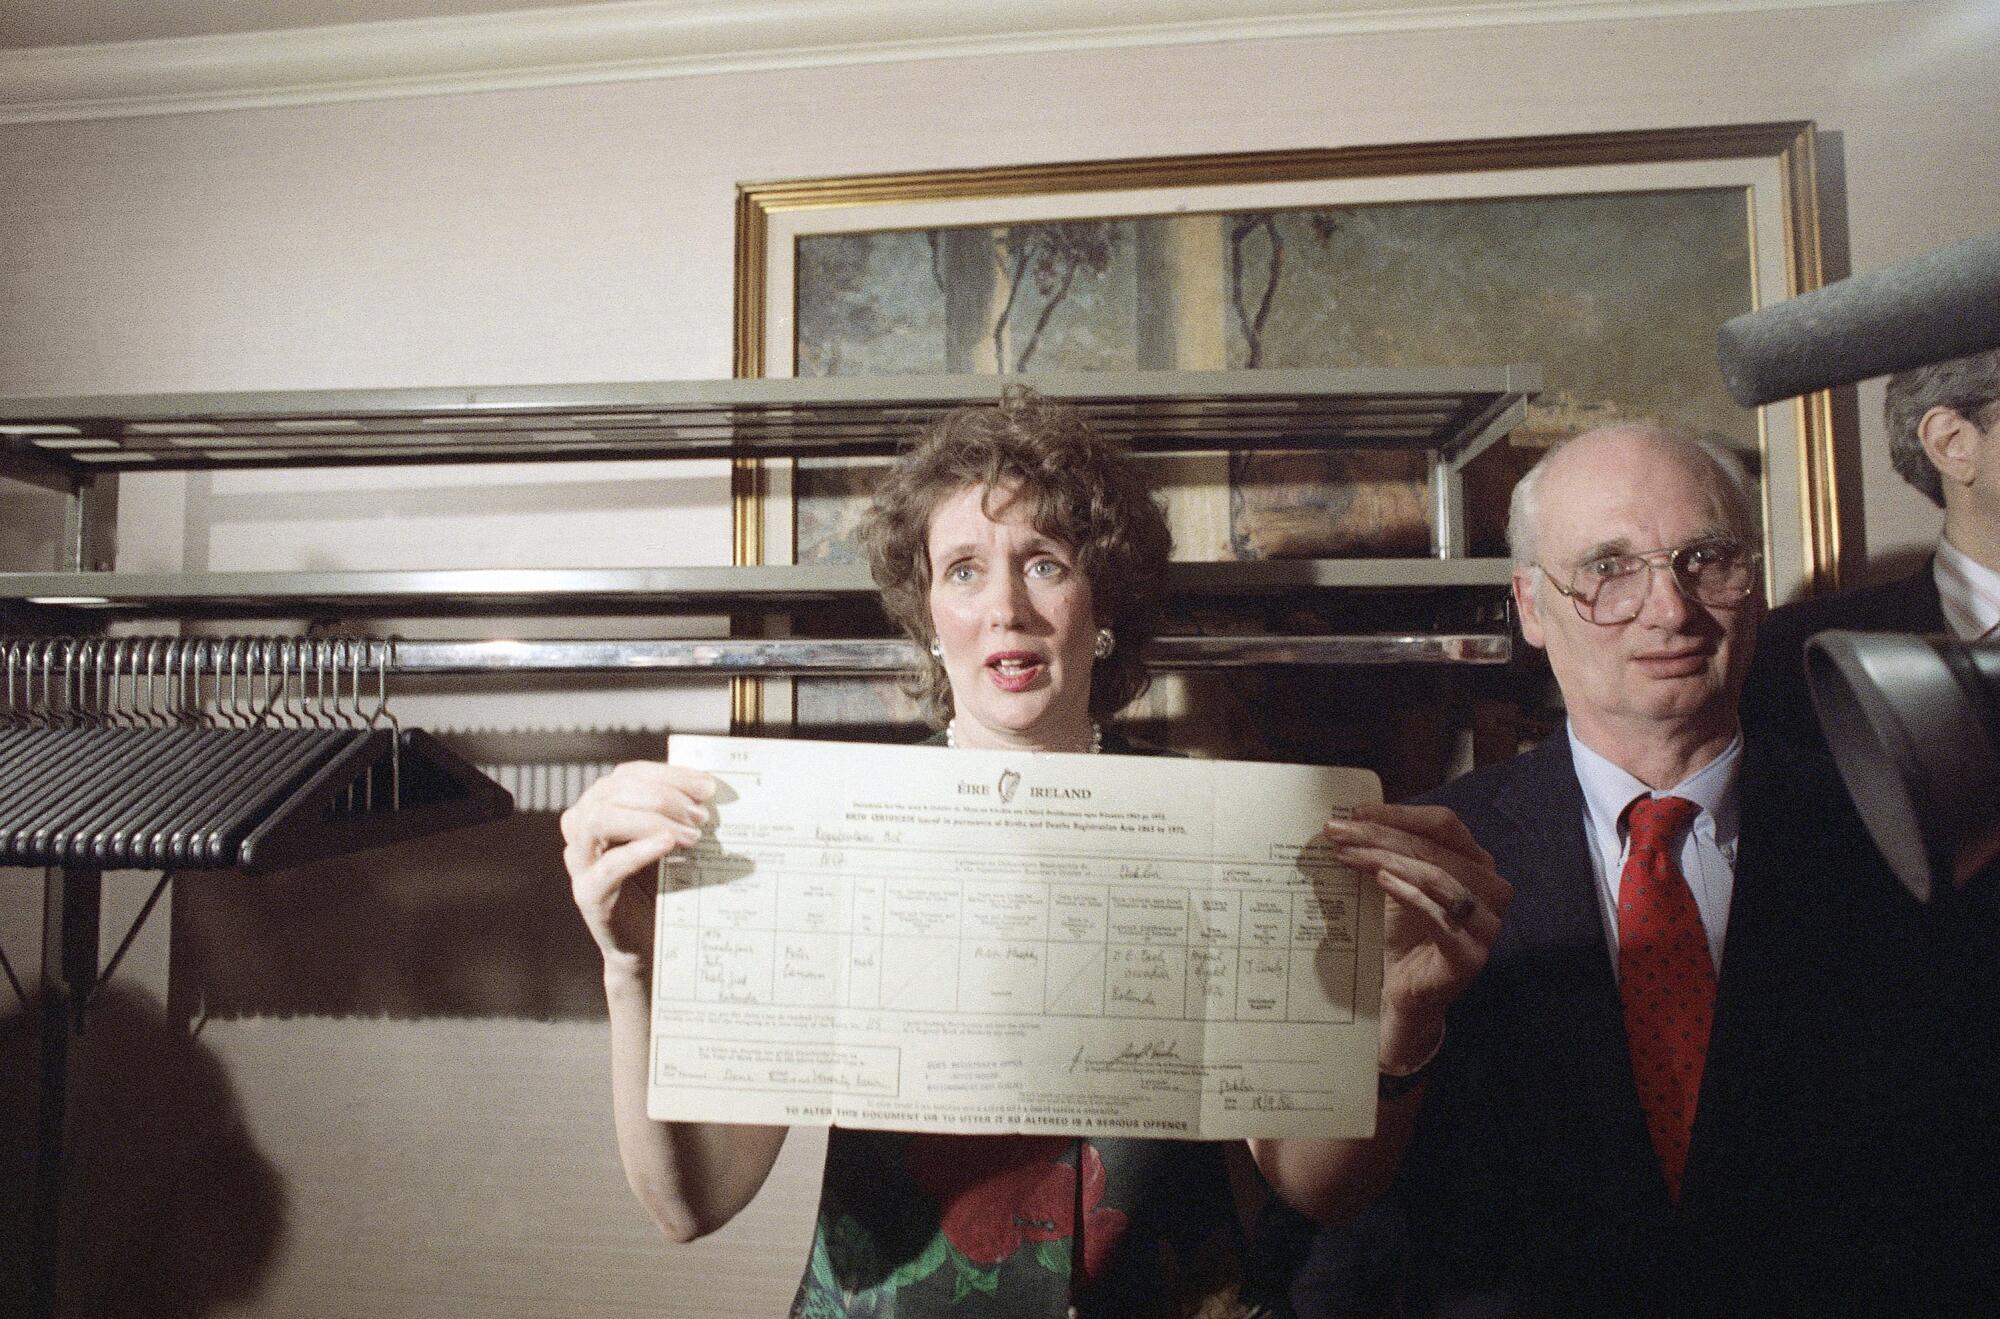 Annie Murphy holds up her son's birth certificate.